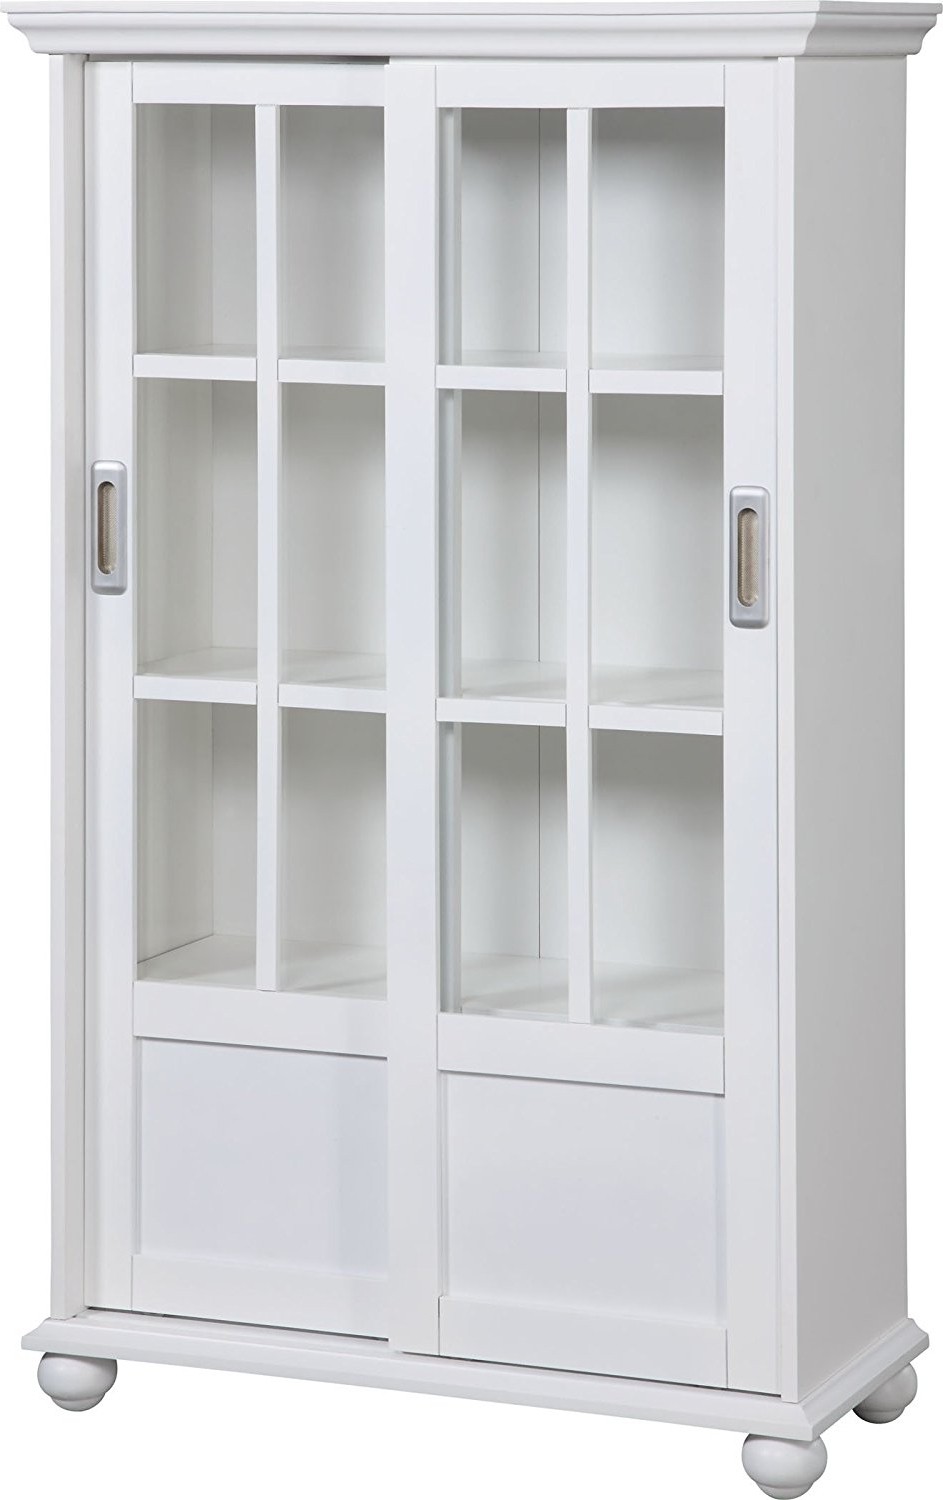 15 ideas of white bookcases with glass doors 3